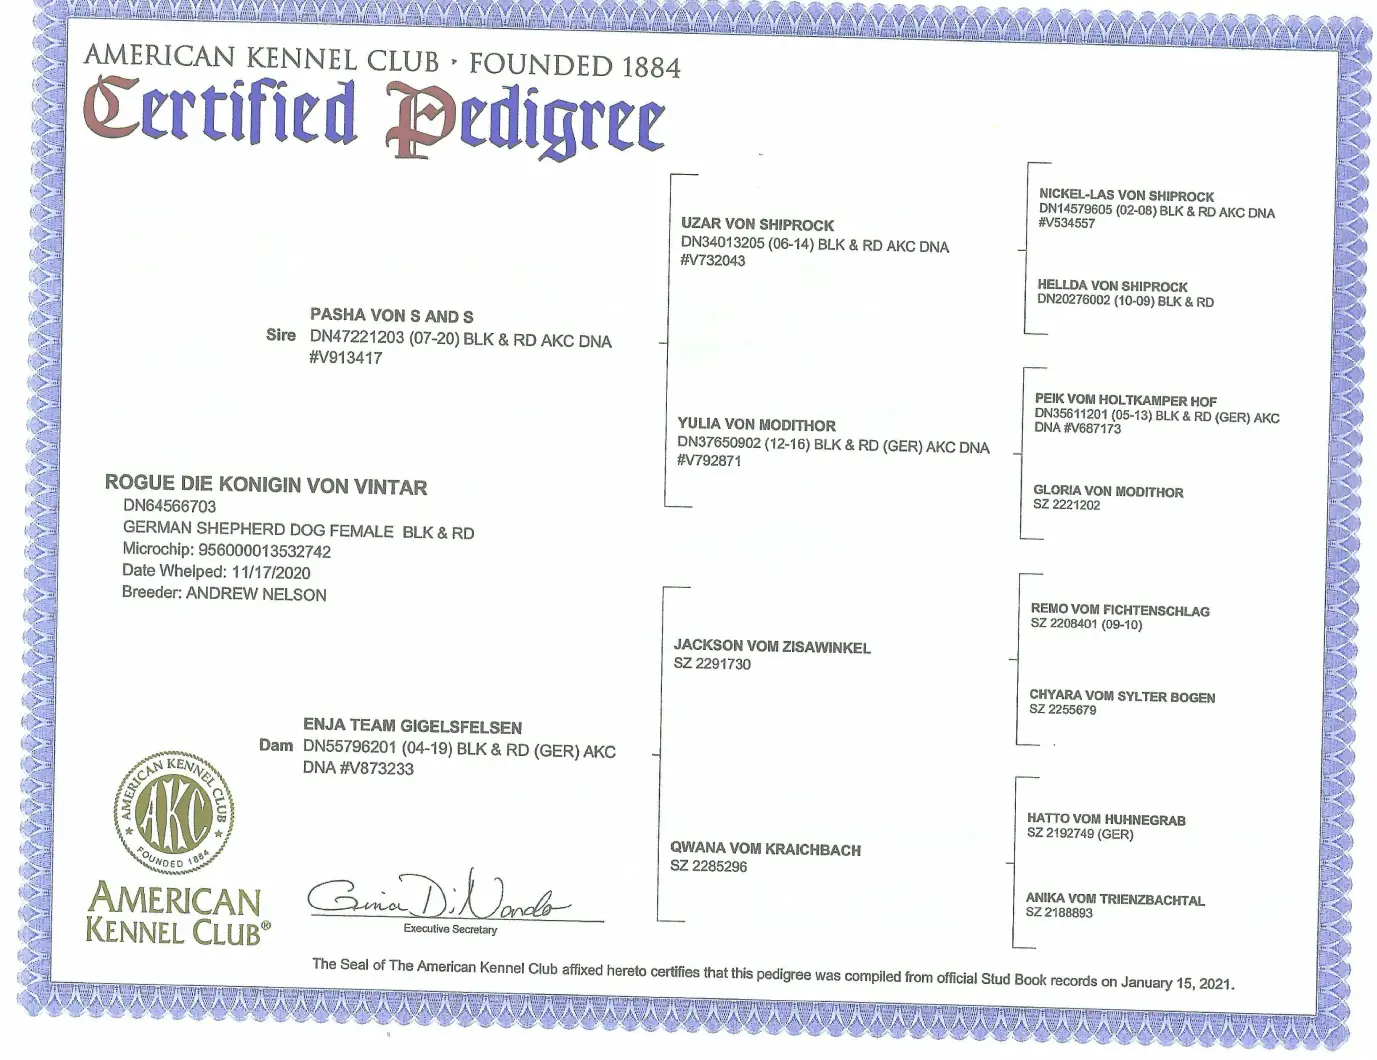 A certificate of authenticity for an american kennel club pedigree.